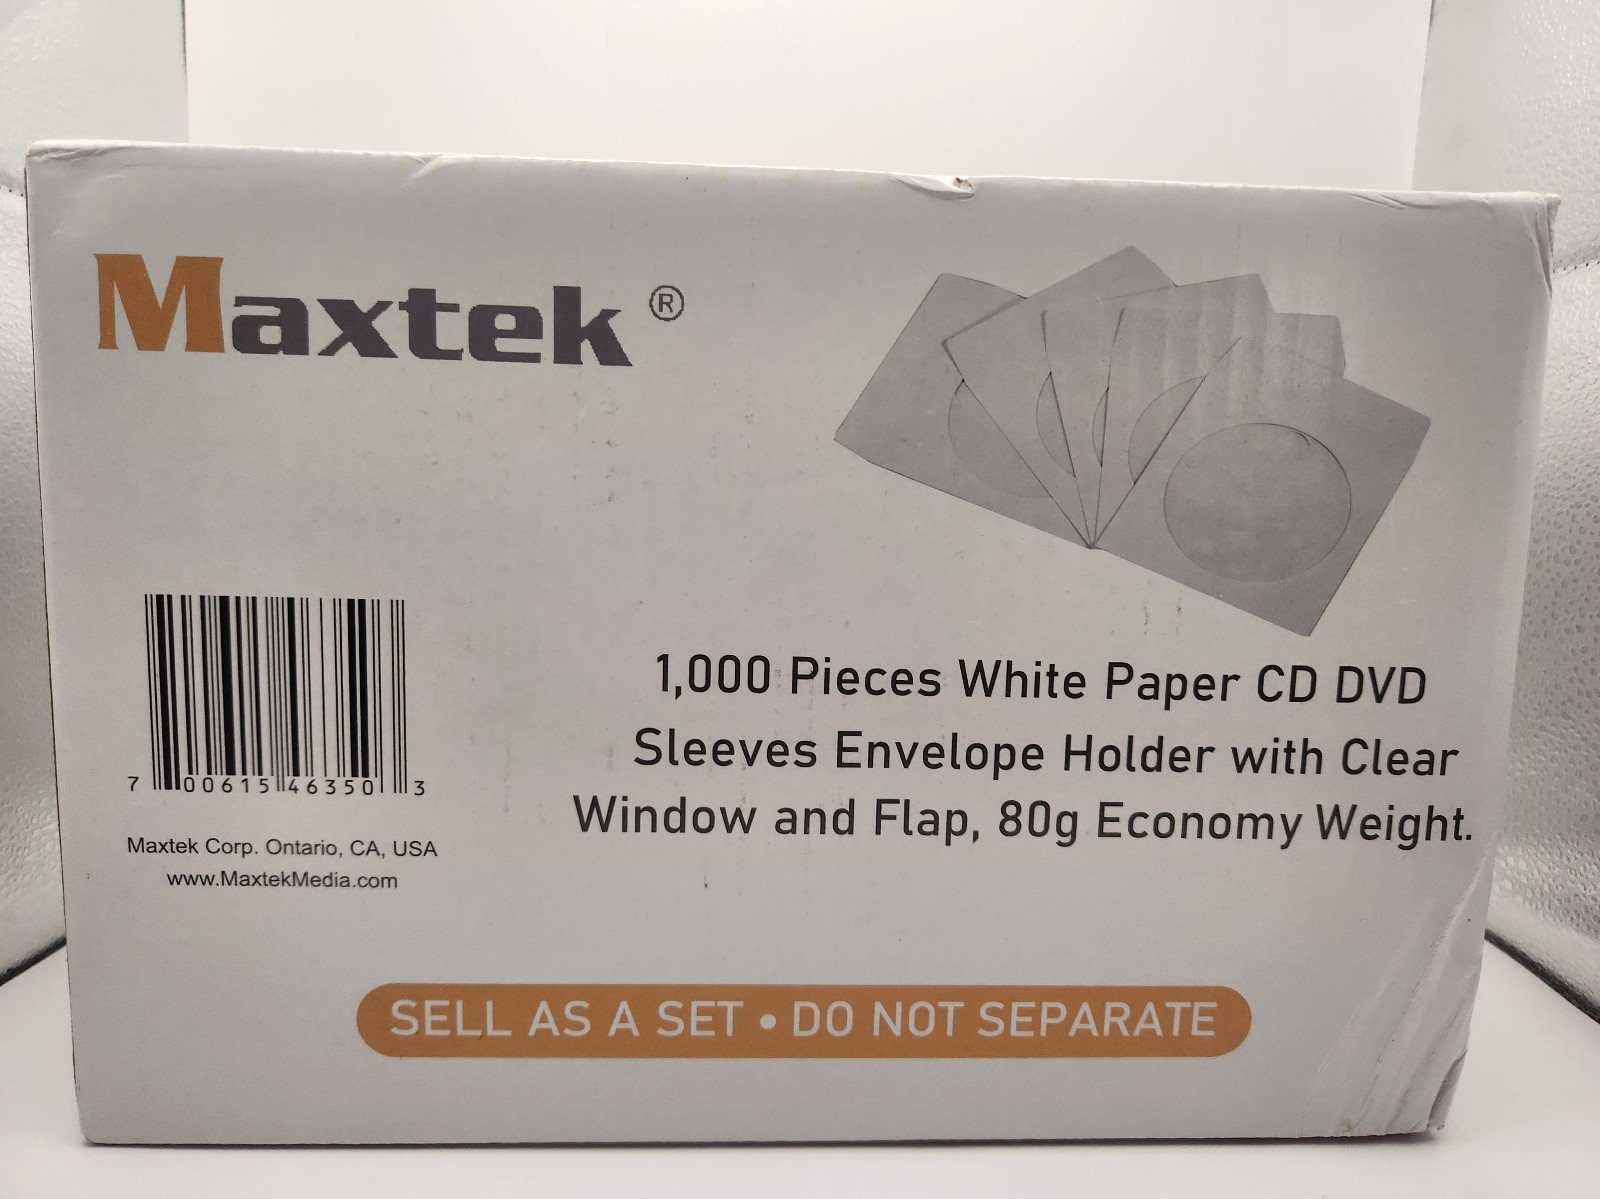 Maxtek 1,000 Pieces White Paper CD DVD Sleeves 3FpCOPcl